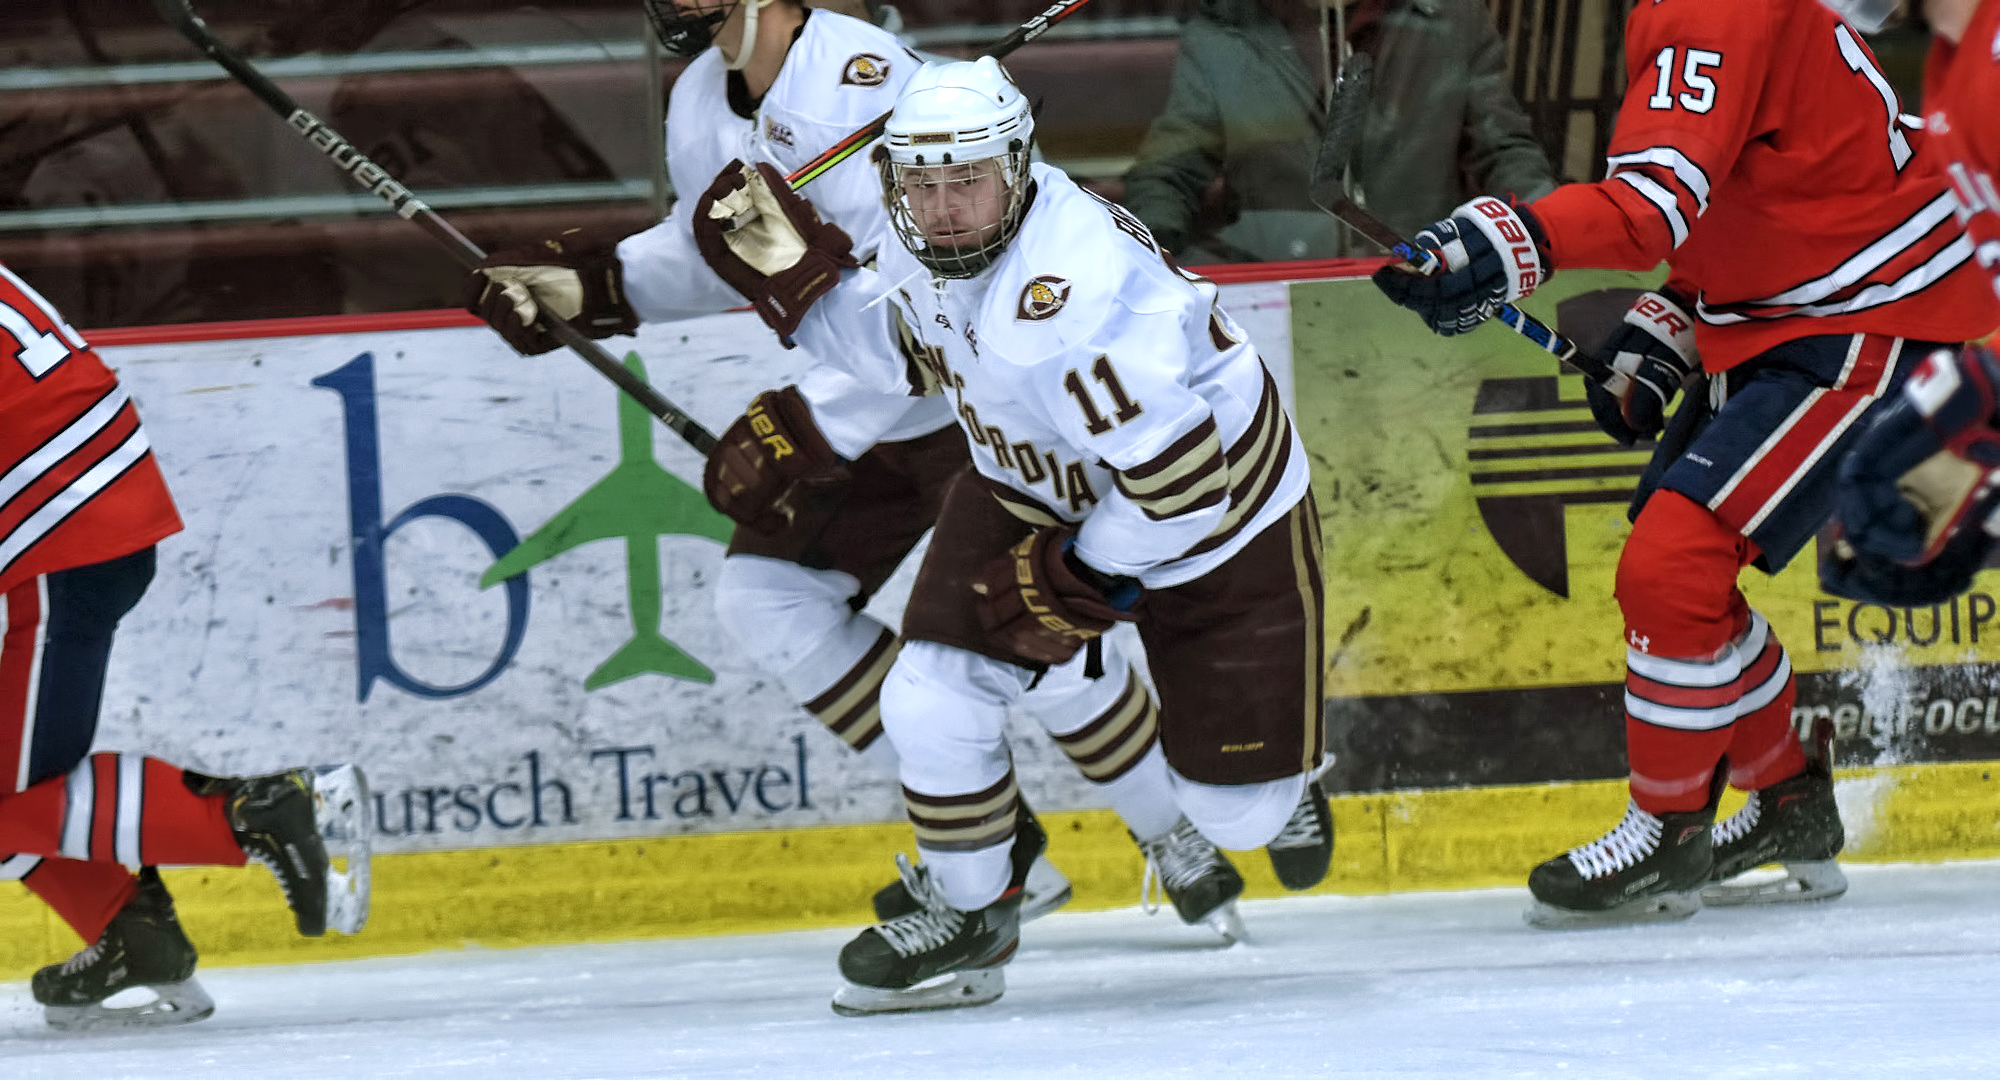 Jacen Bracko had a team-high five shots on goal in the Cobbers' series finale with St. Mary's.